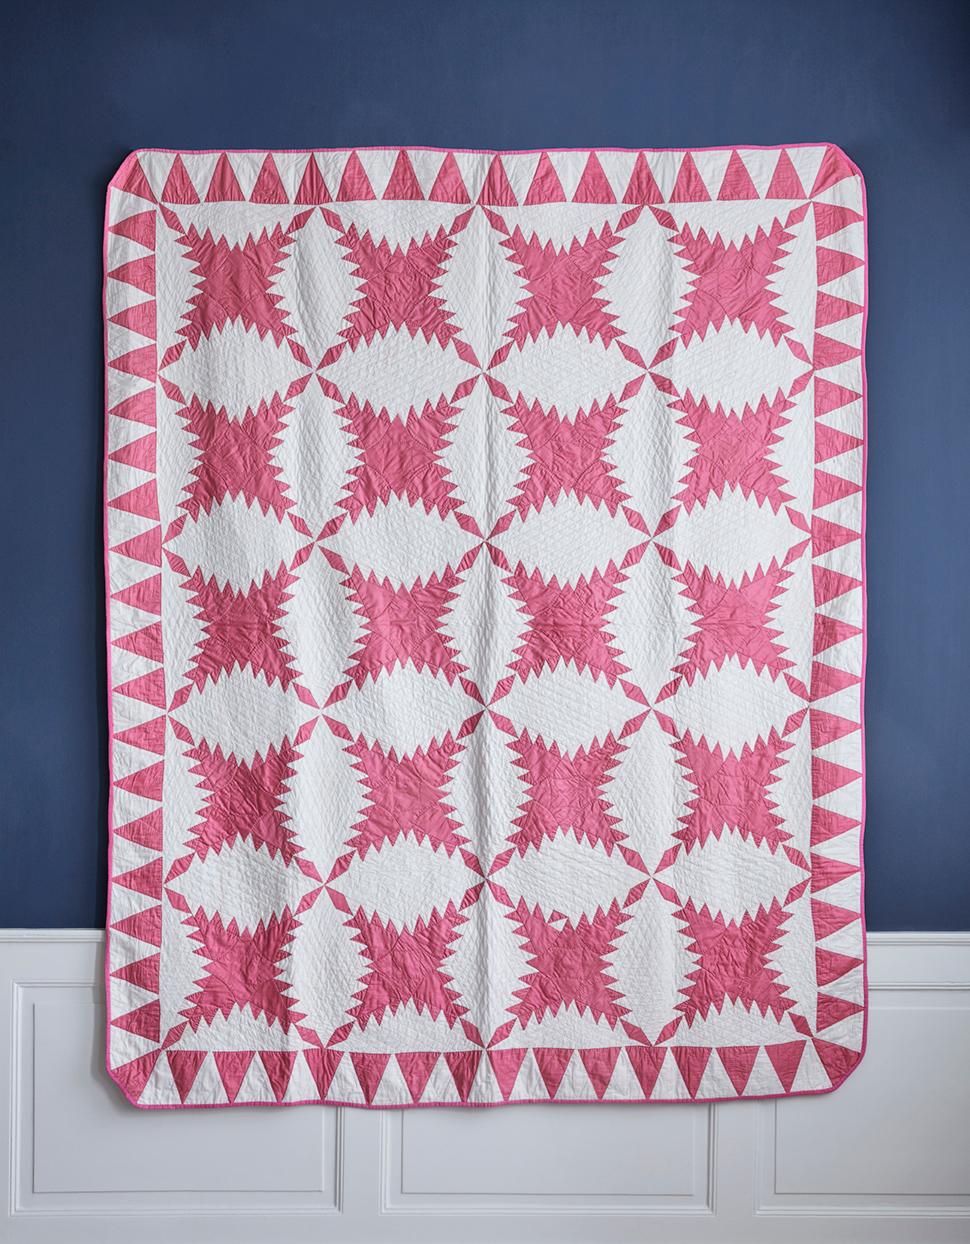 Beautiful pink and white antique American 'Feathered Stars' patchwork quilt. Lovely pyramid border.